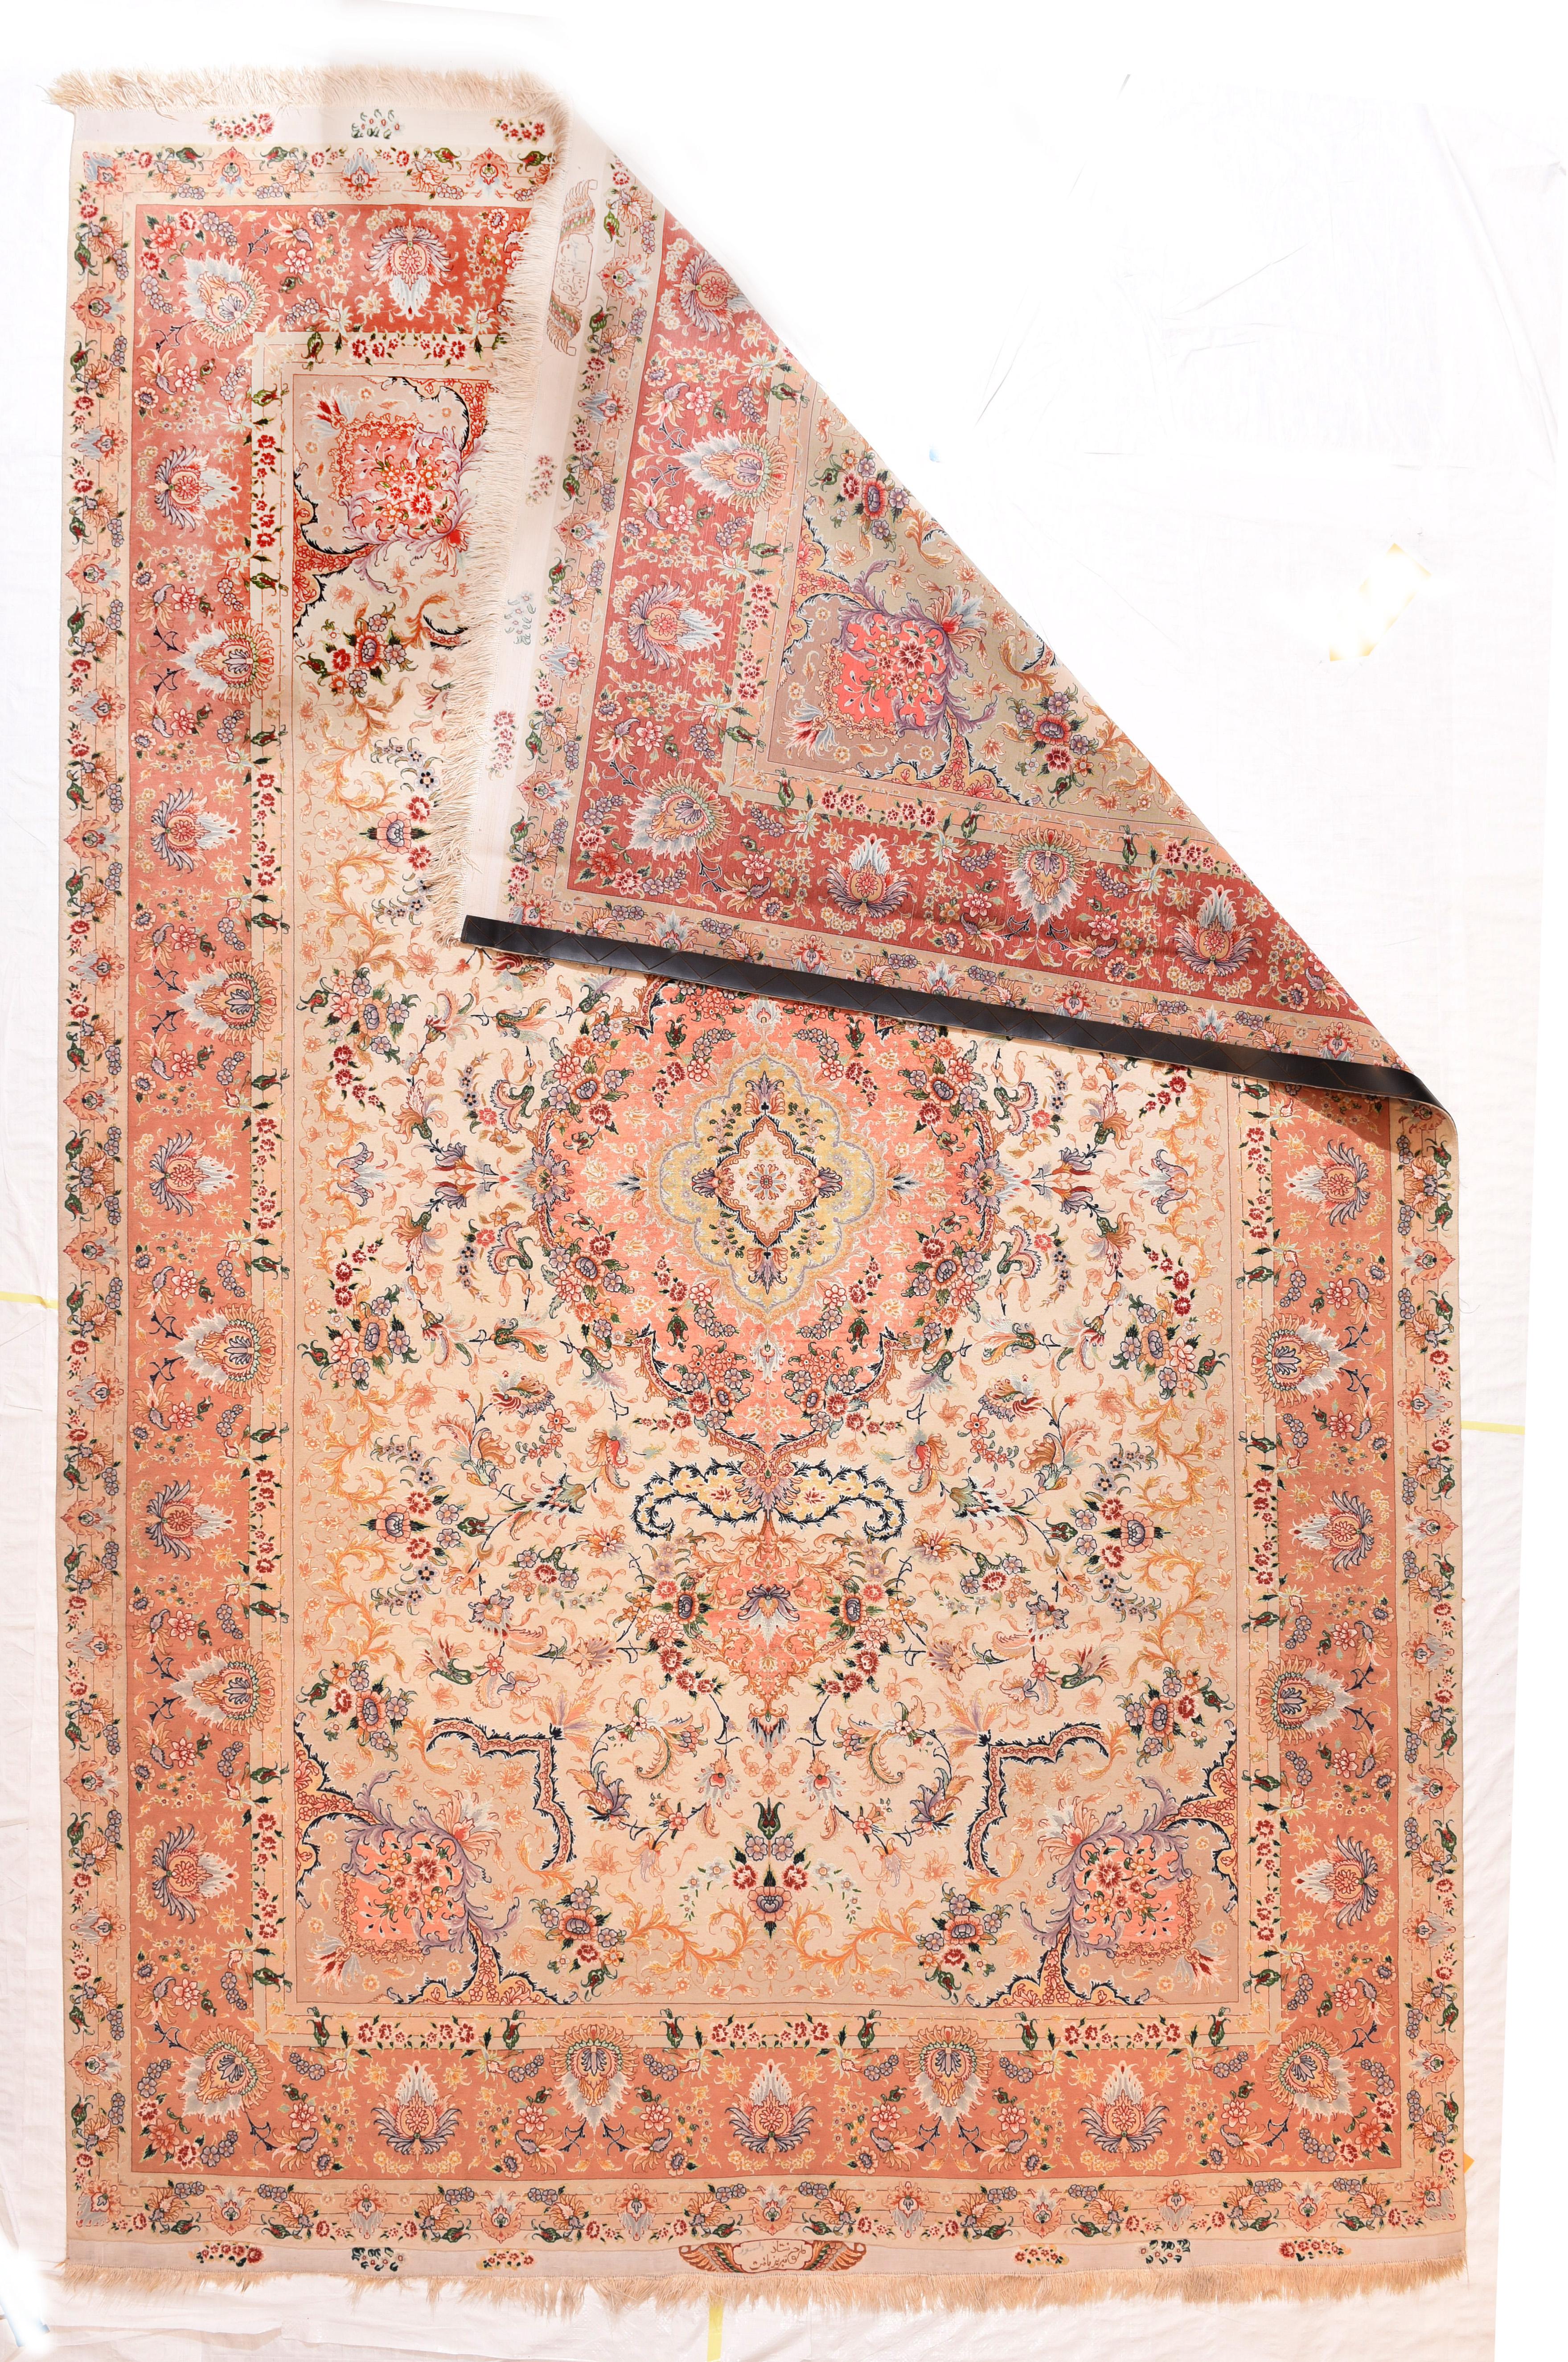 Extremely Fine Persian Tabriz Wool & Silk Soven by the artist Master Weaver with a Silk foundation Rug 6'7'' x 10'2''. Elaboration knows no bounds on this very finely woven, NW Persian urban carpet with an eggshell Sub-field hosting myriads of